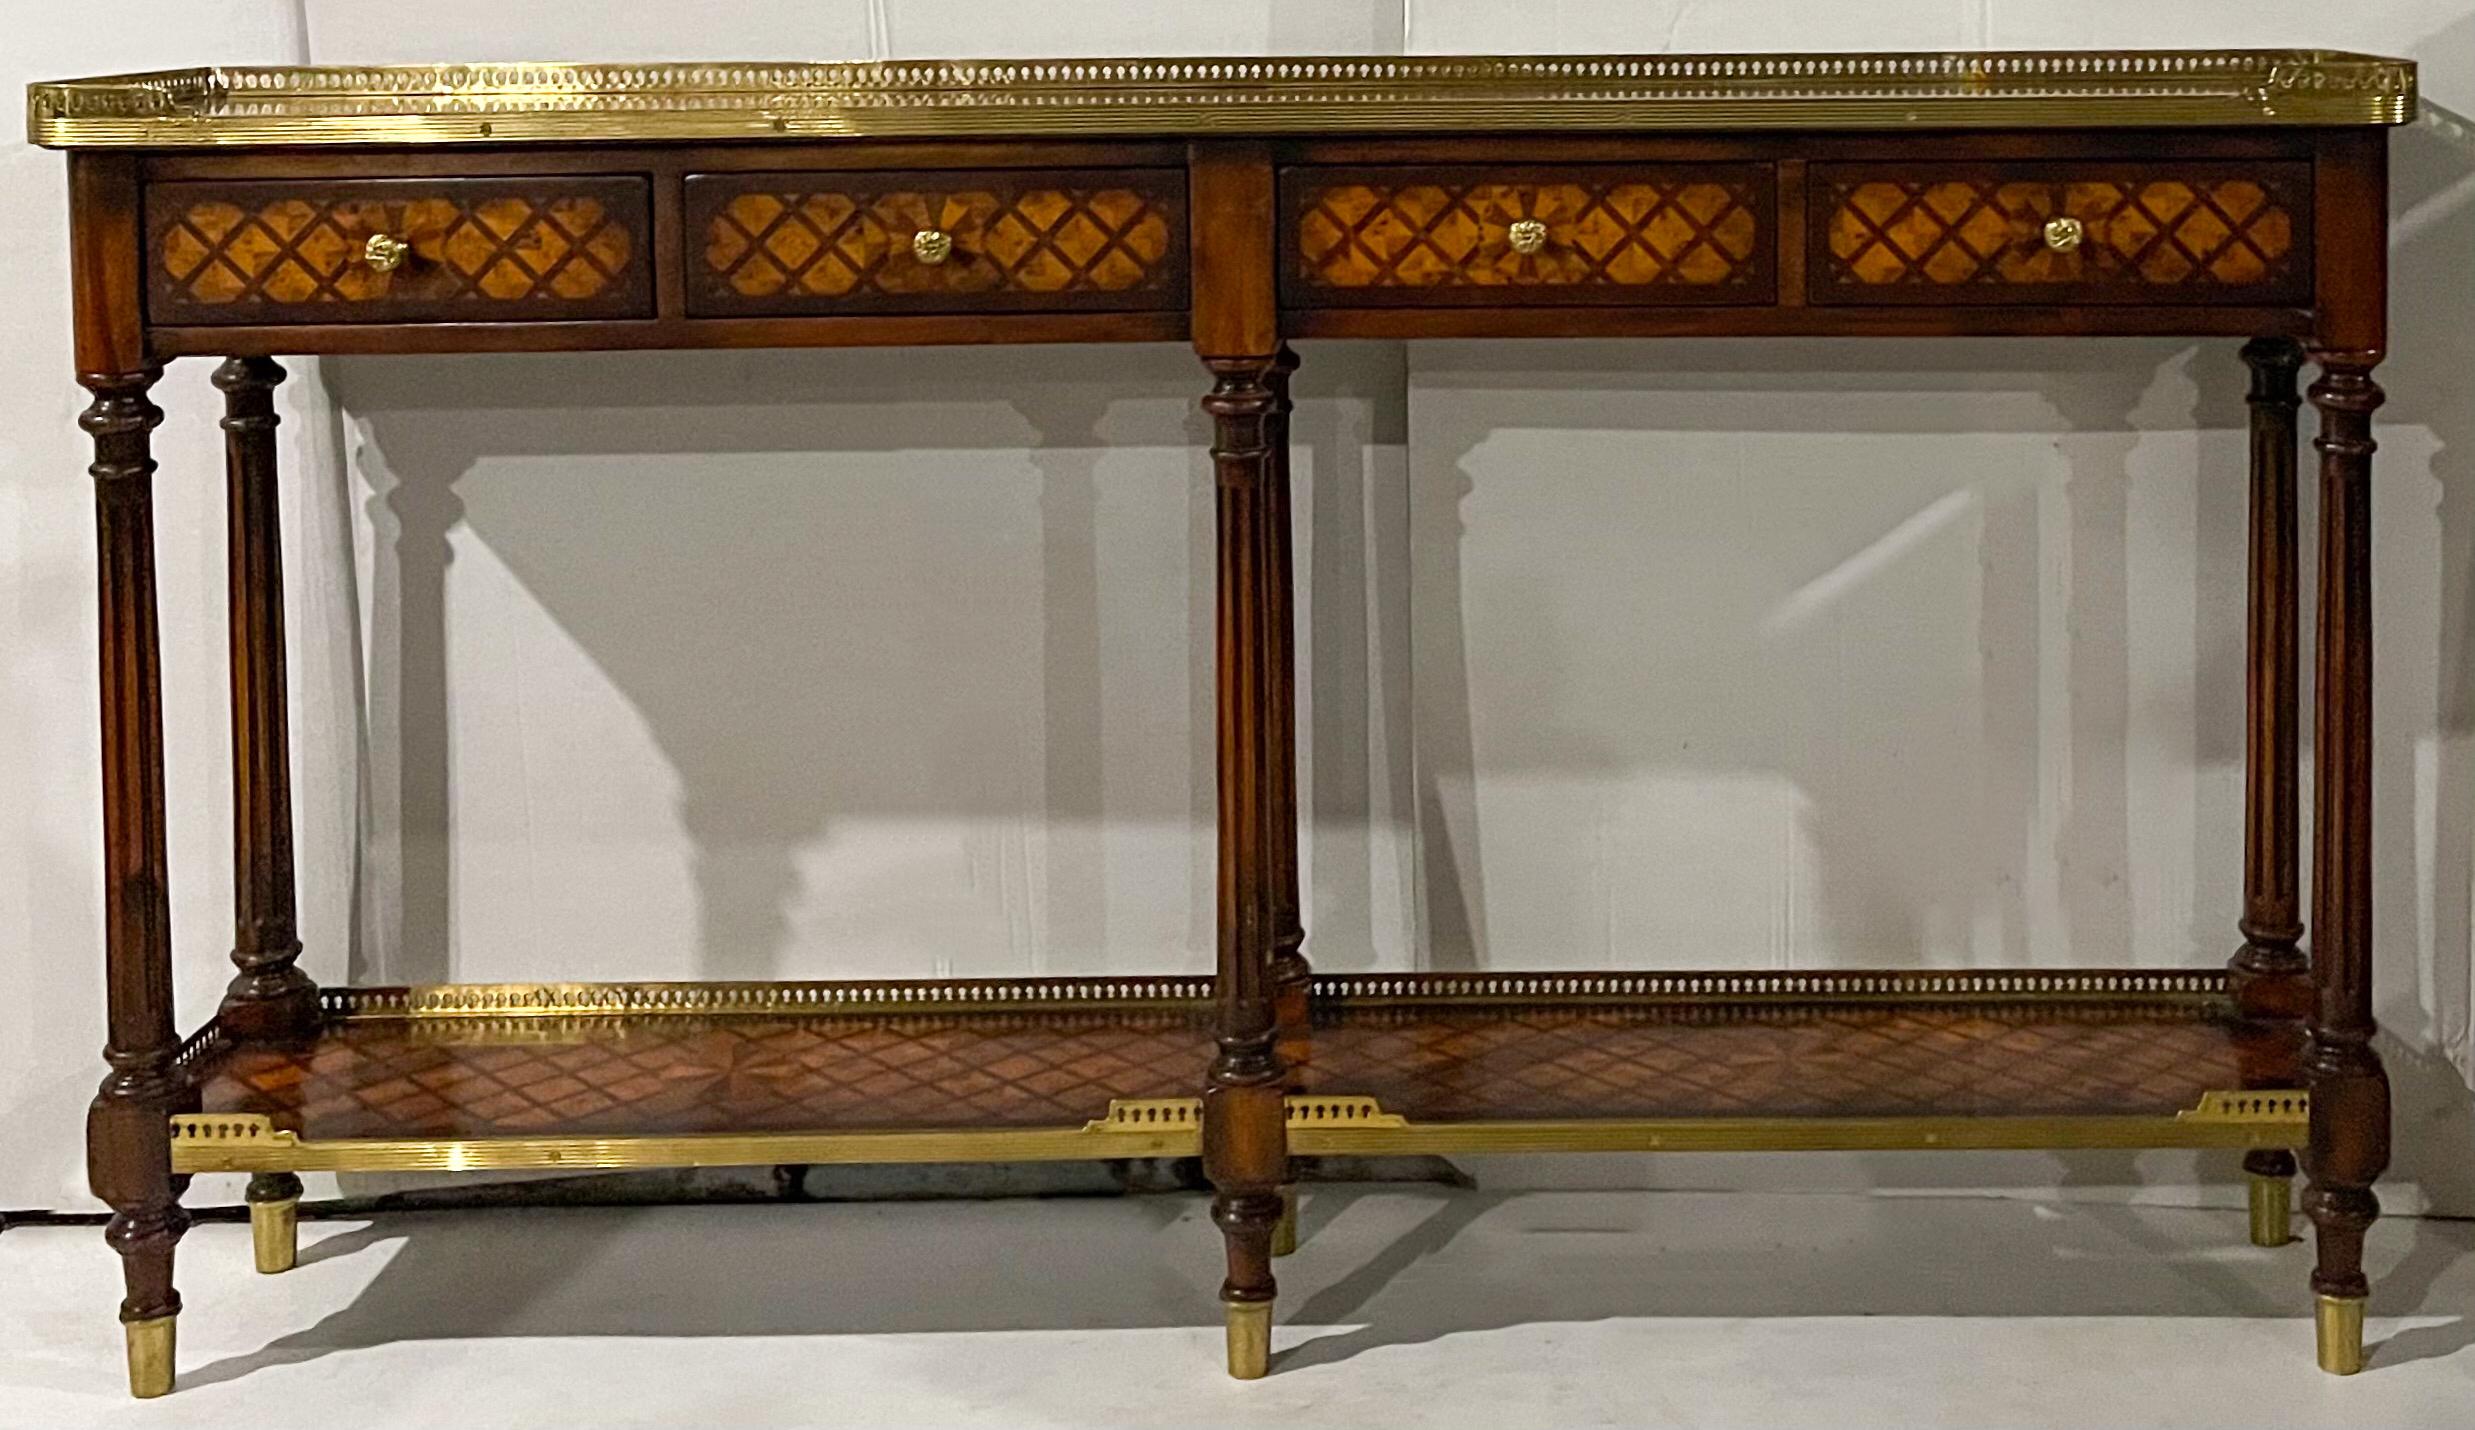 This is a regency style mahogany inlaid console table with brass gallery attributed to Theodore Alexander. It is in wonderful condition and dates to the later part of the 20th century.